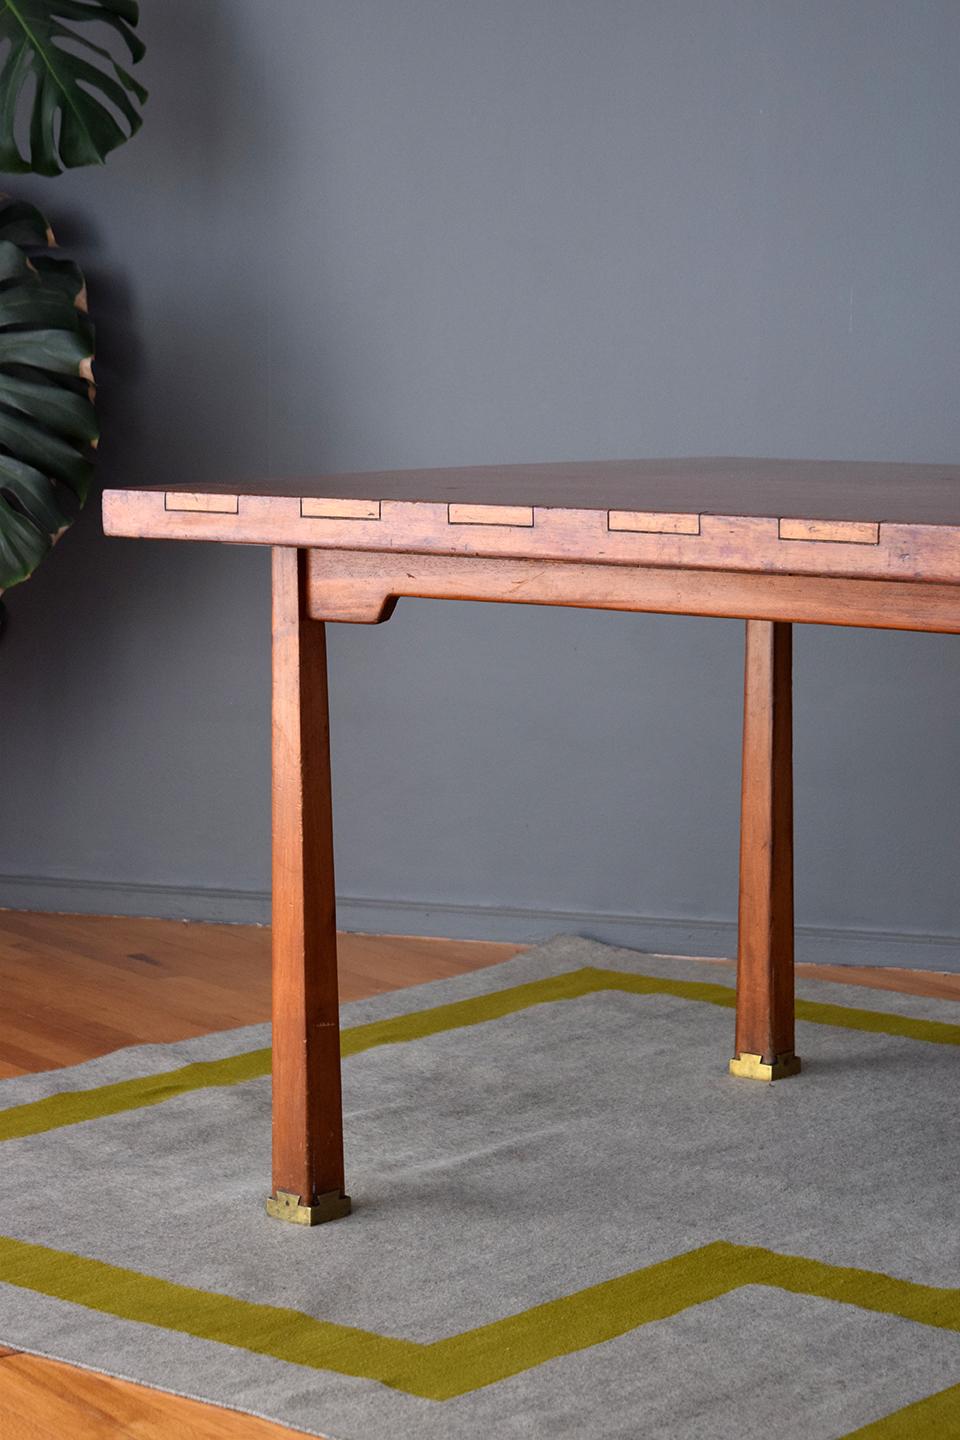 Laminated 1970s Mexican Modern Dinning Table Made by Edmond Spence